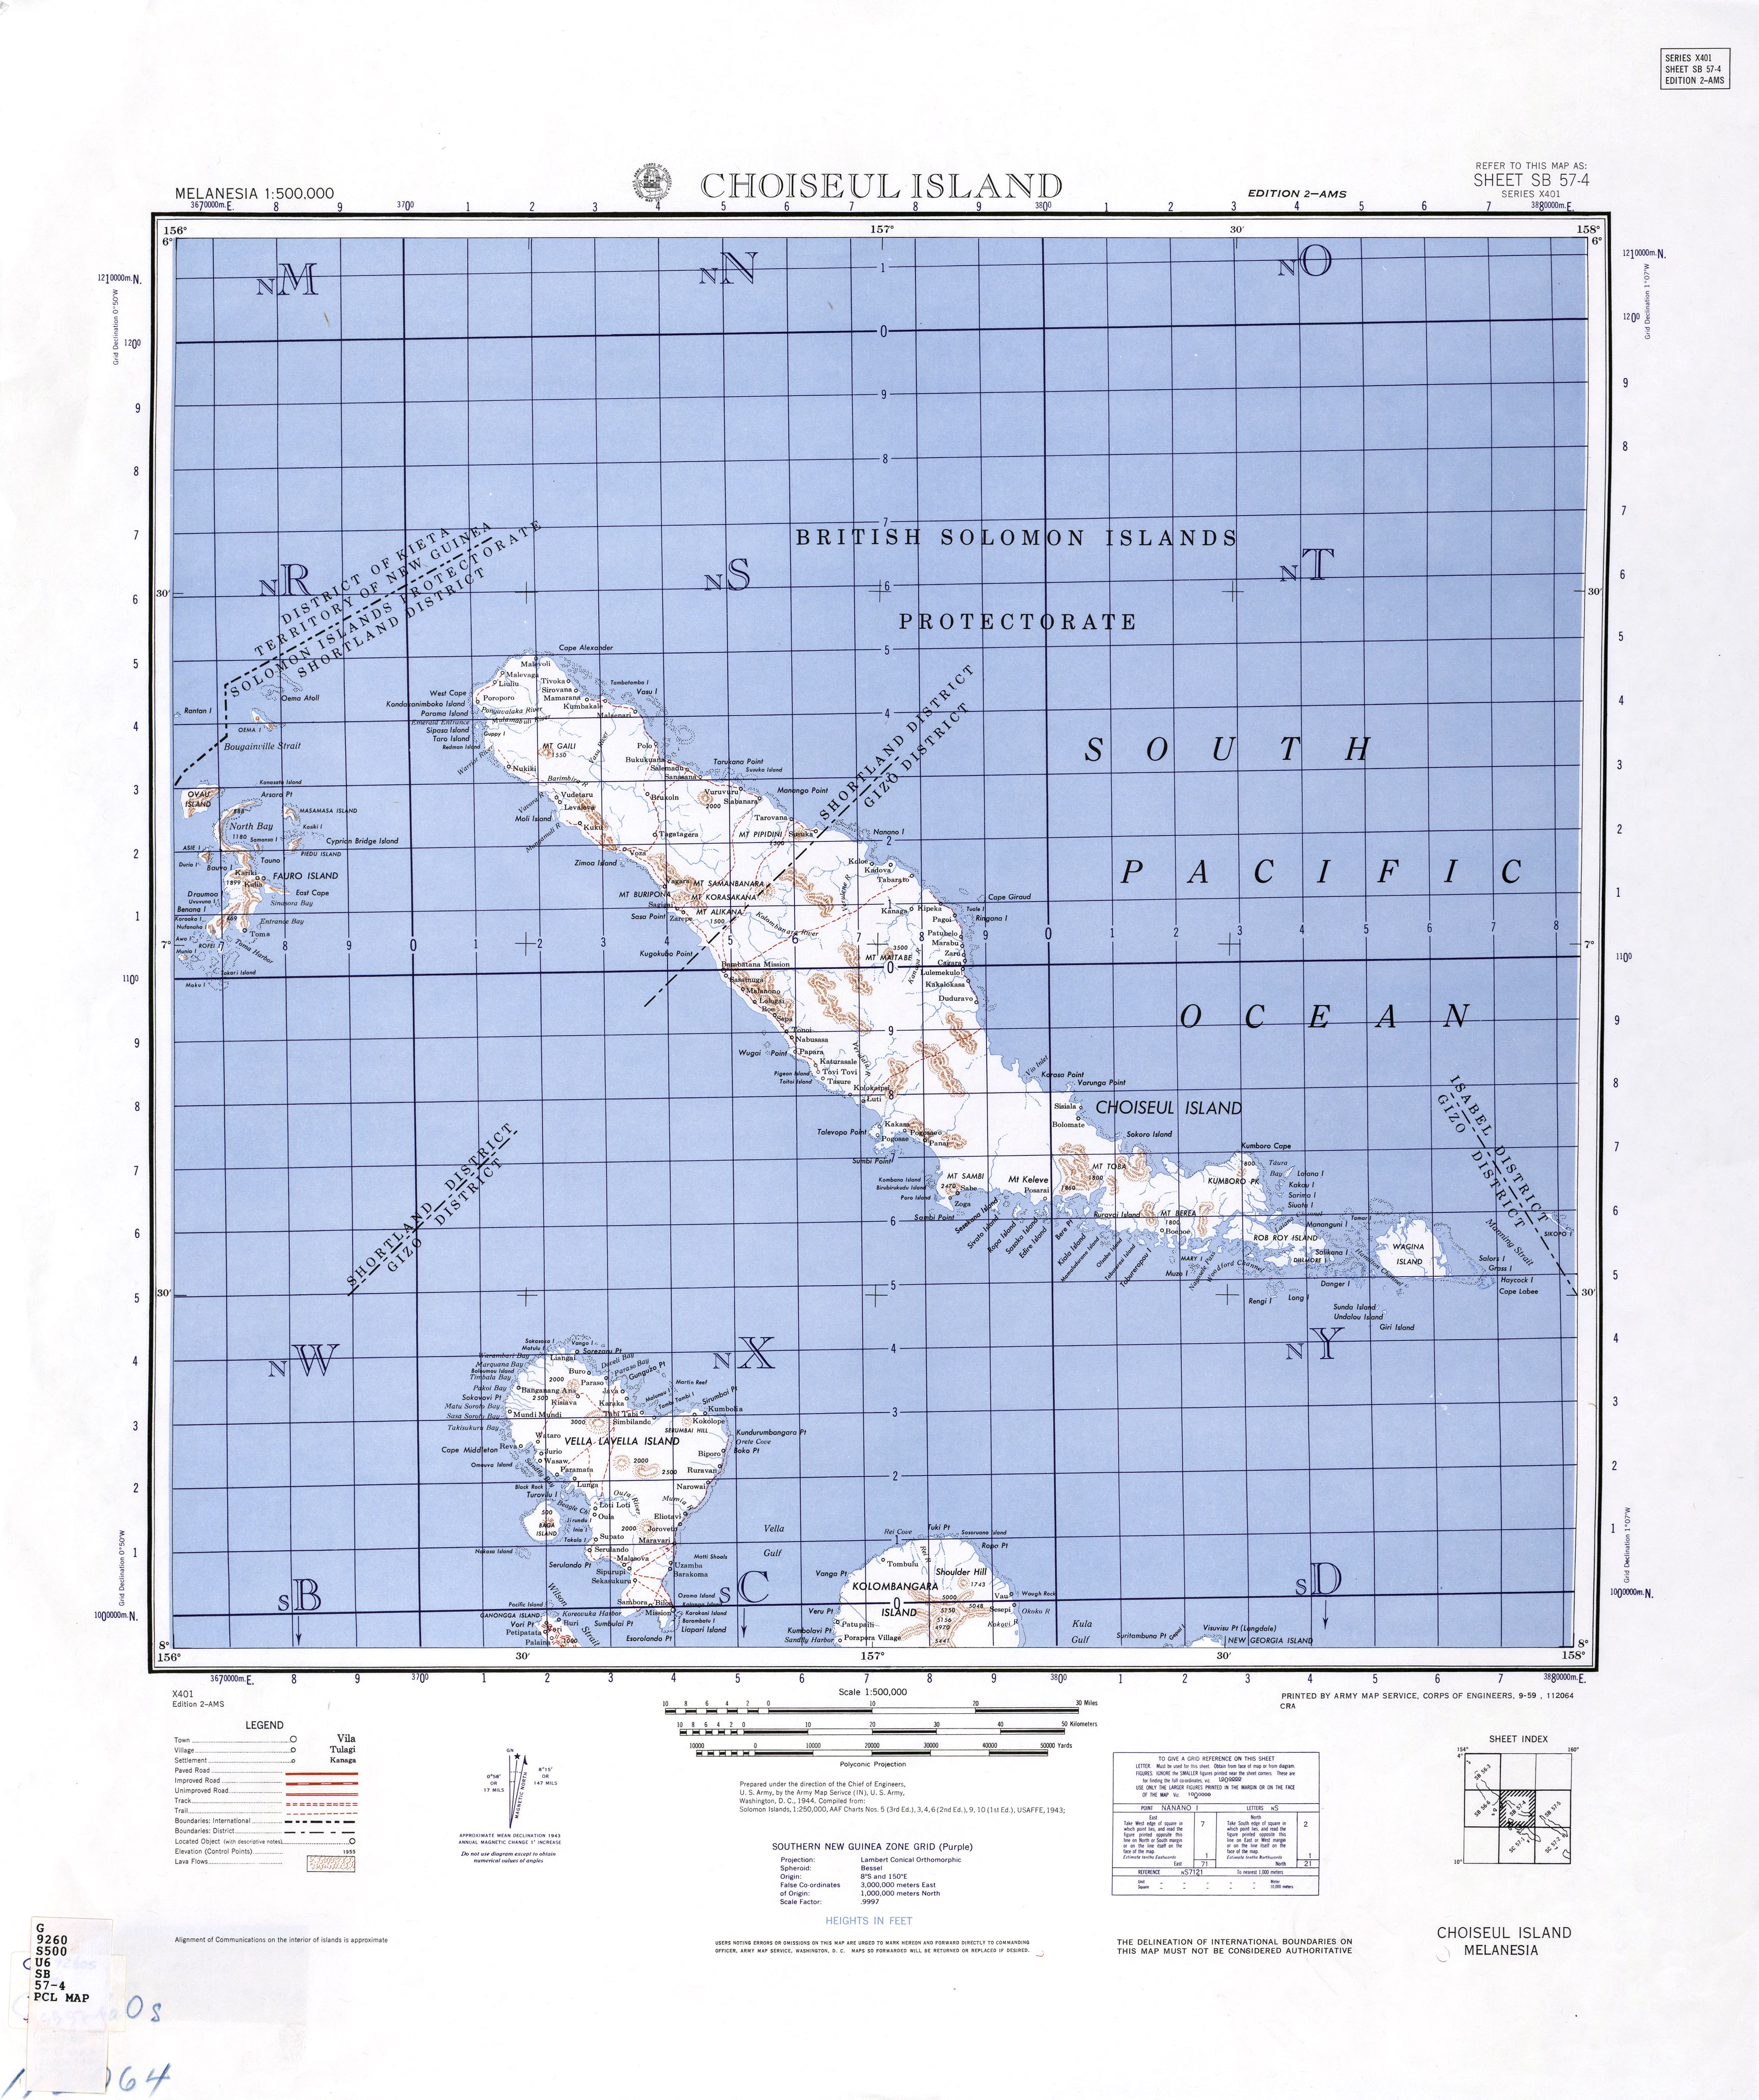 1944 United States Army map of Choiseul Island, the northernmost of the Solomon Islands.